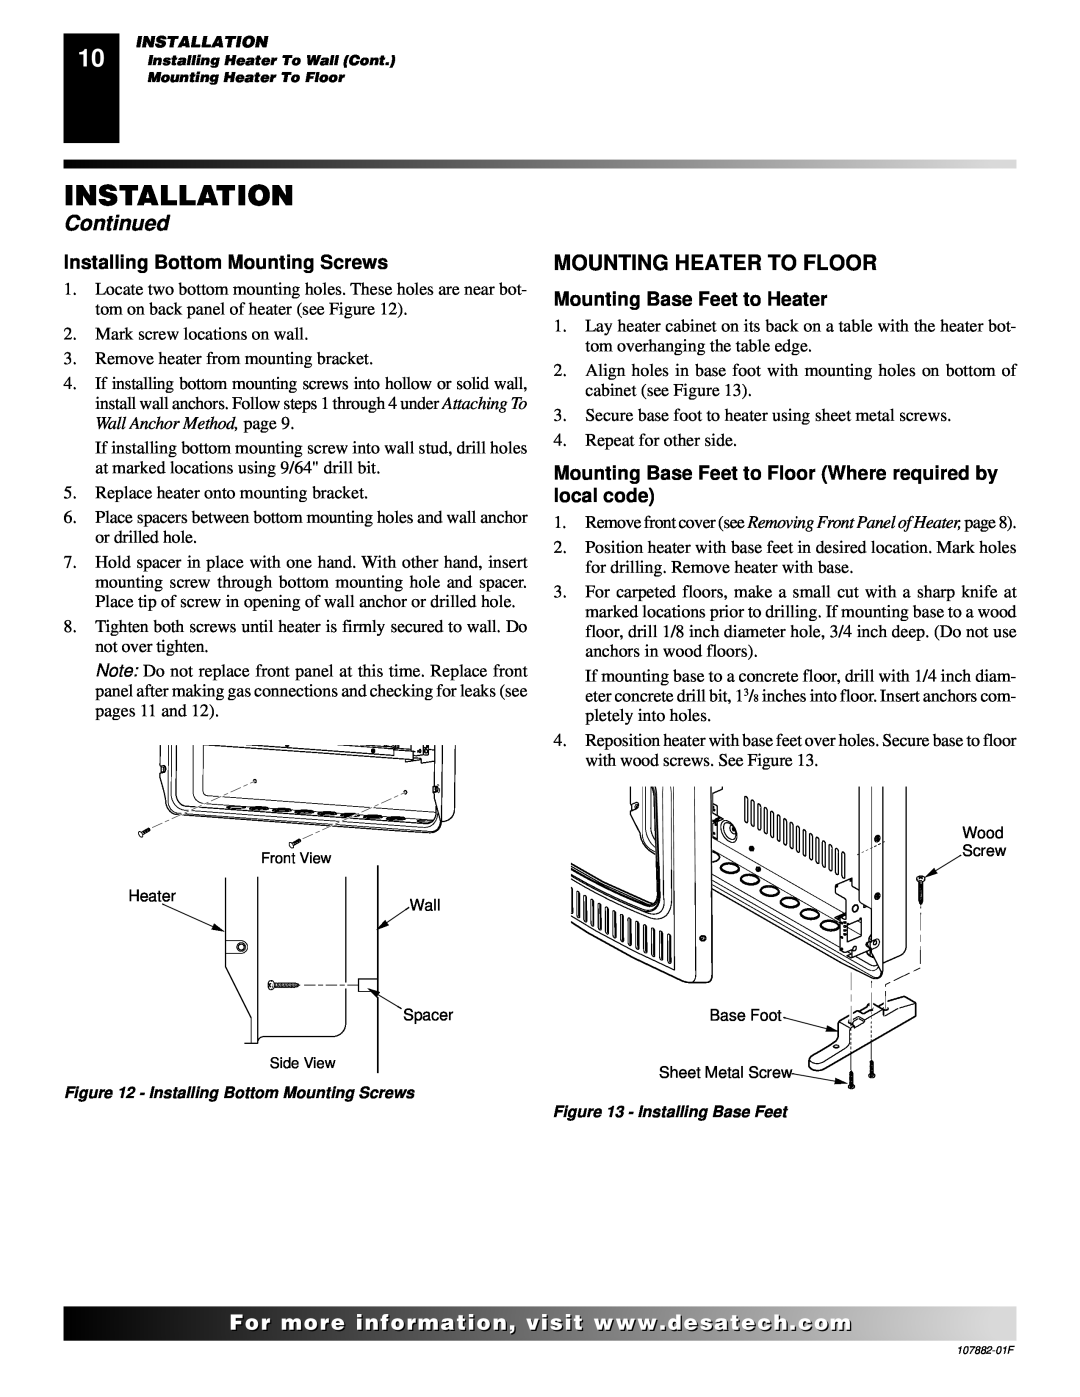 Desa CBN20 installation manual Installation, Continued, Installing Bottom Mounting Screws, Mounting Base Feet to Heater 